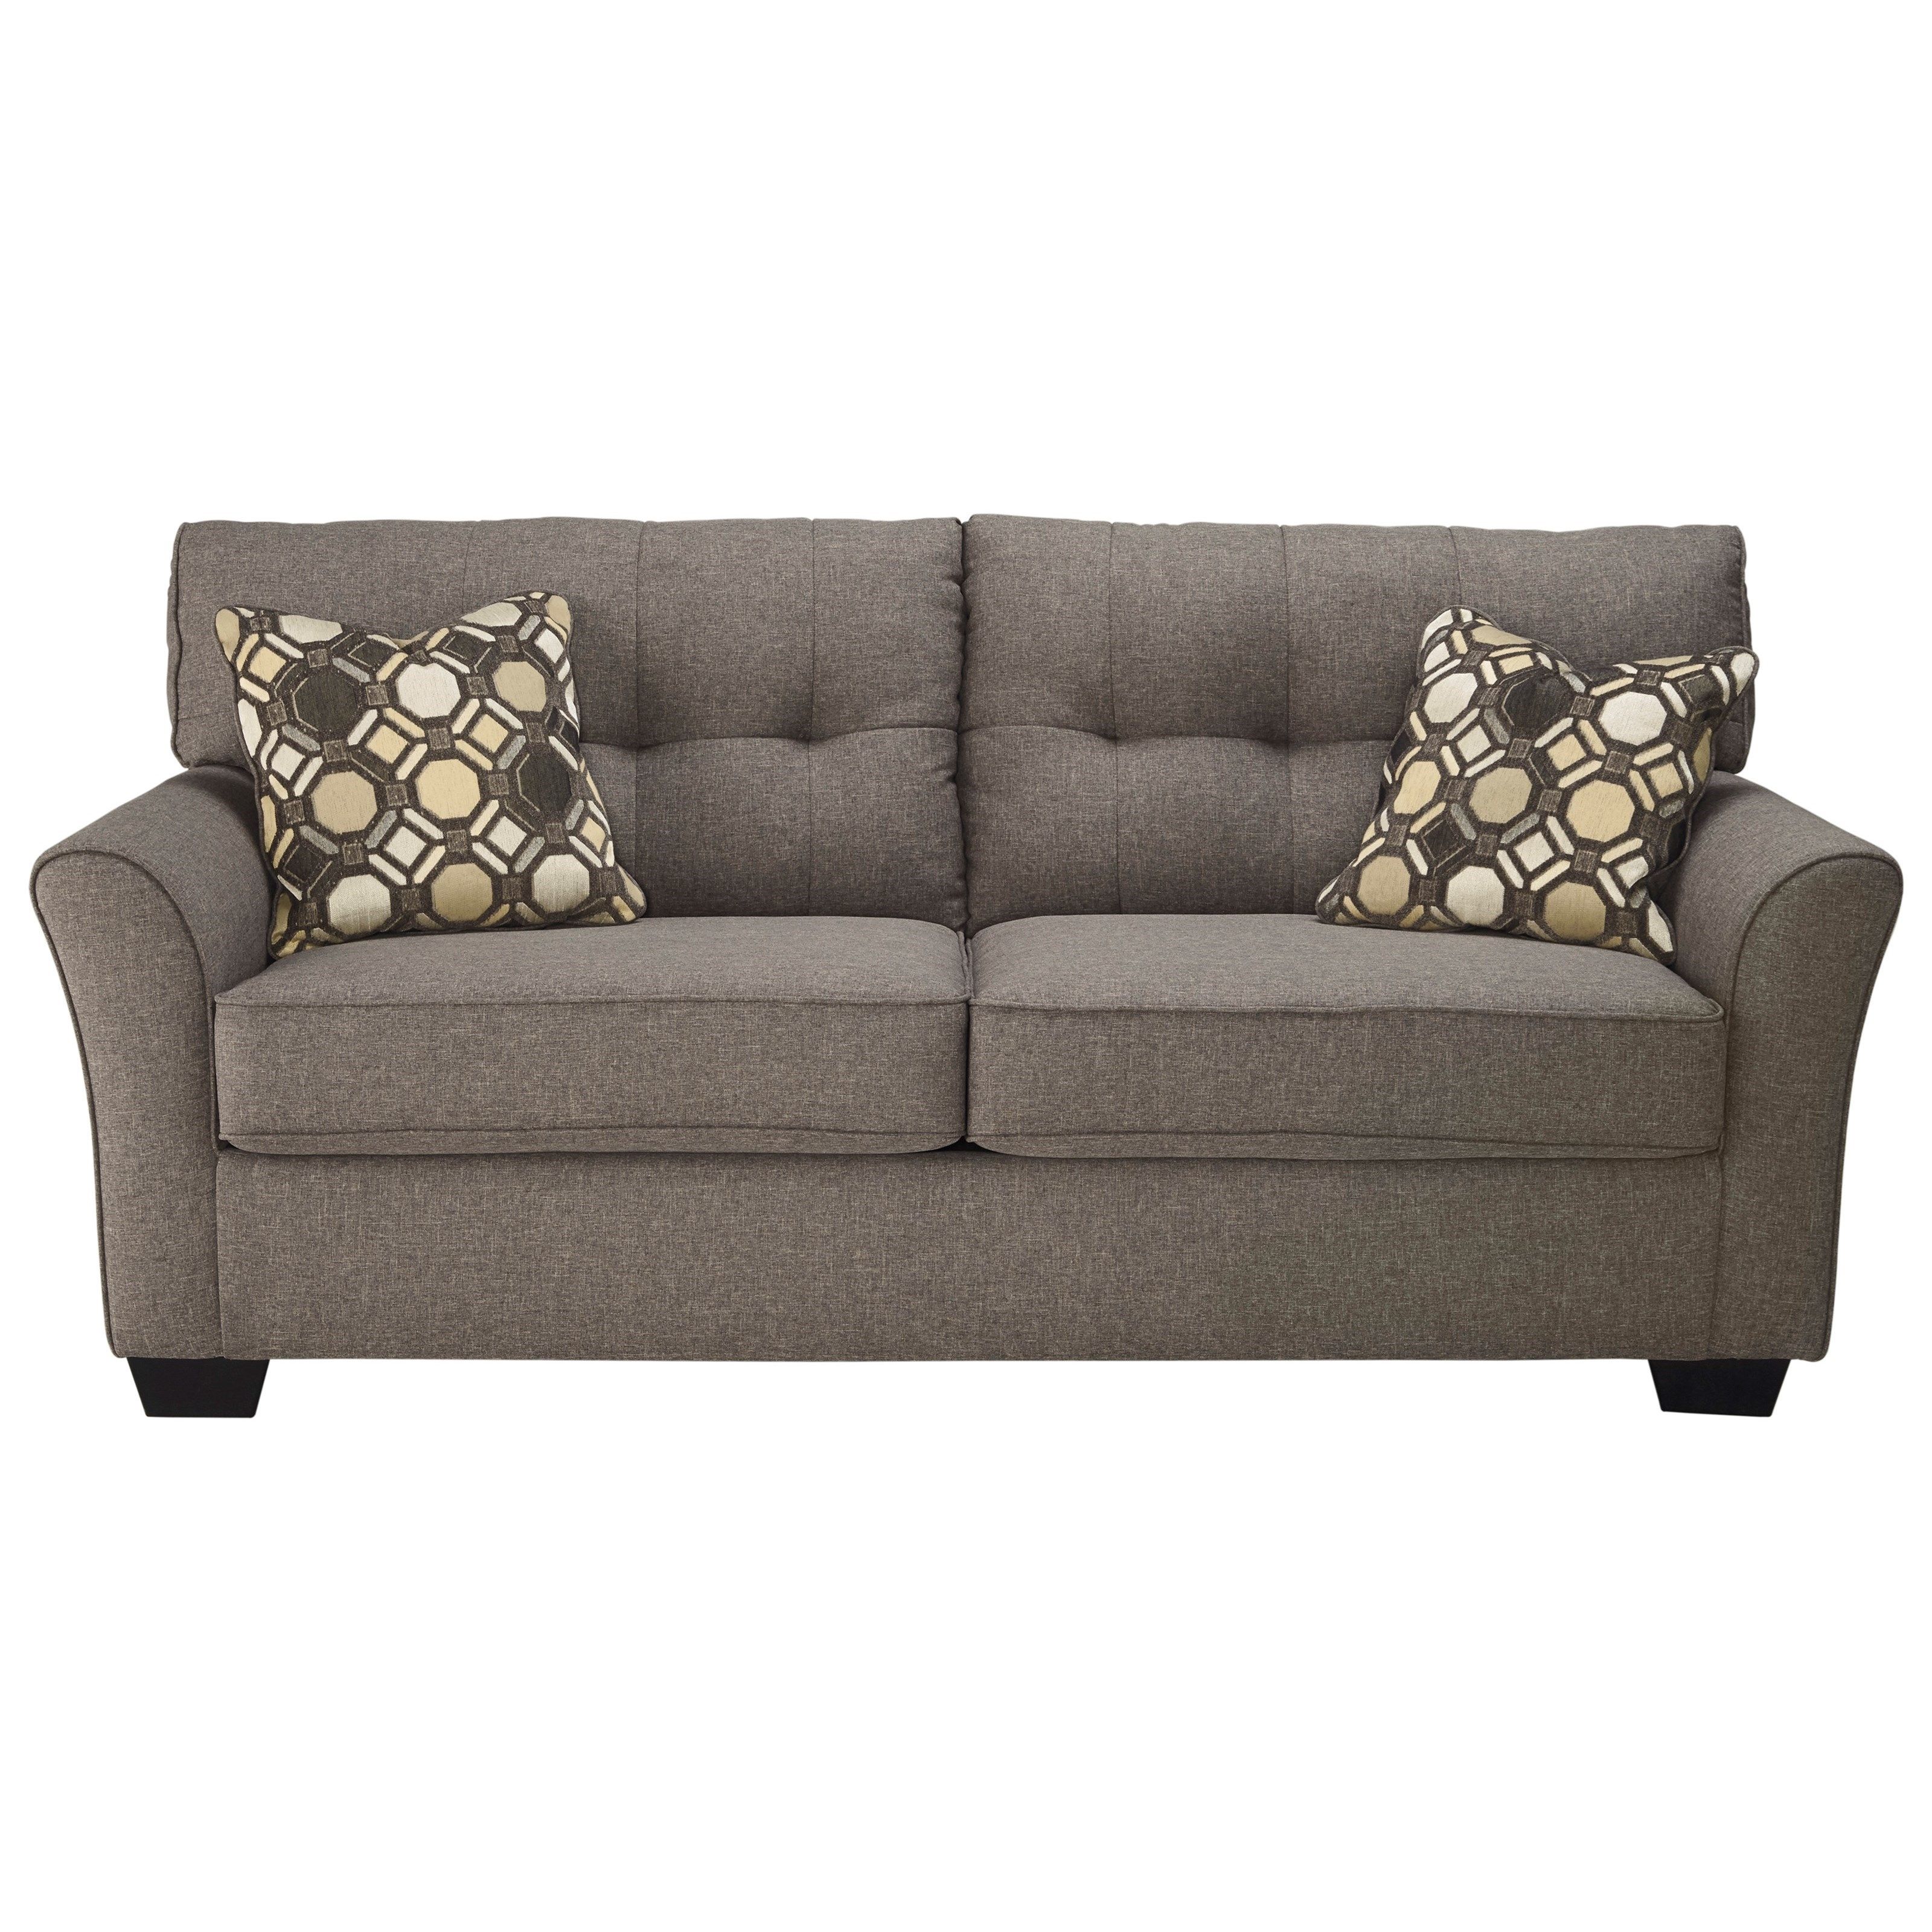 Signature Design Ashley Tibbee Contemporary Sofa With Tufted For Ashley Tufted Sofa (View 6 of 12)